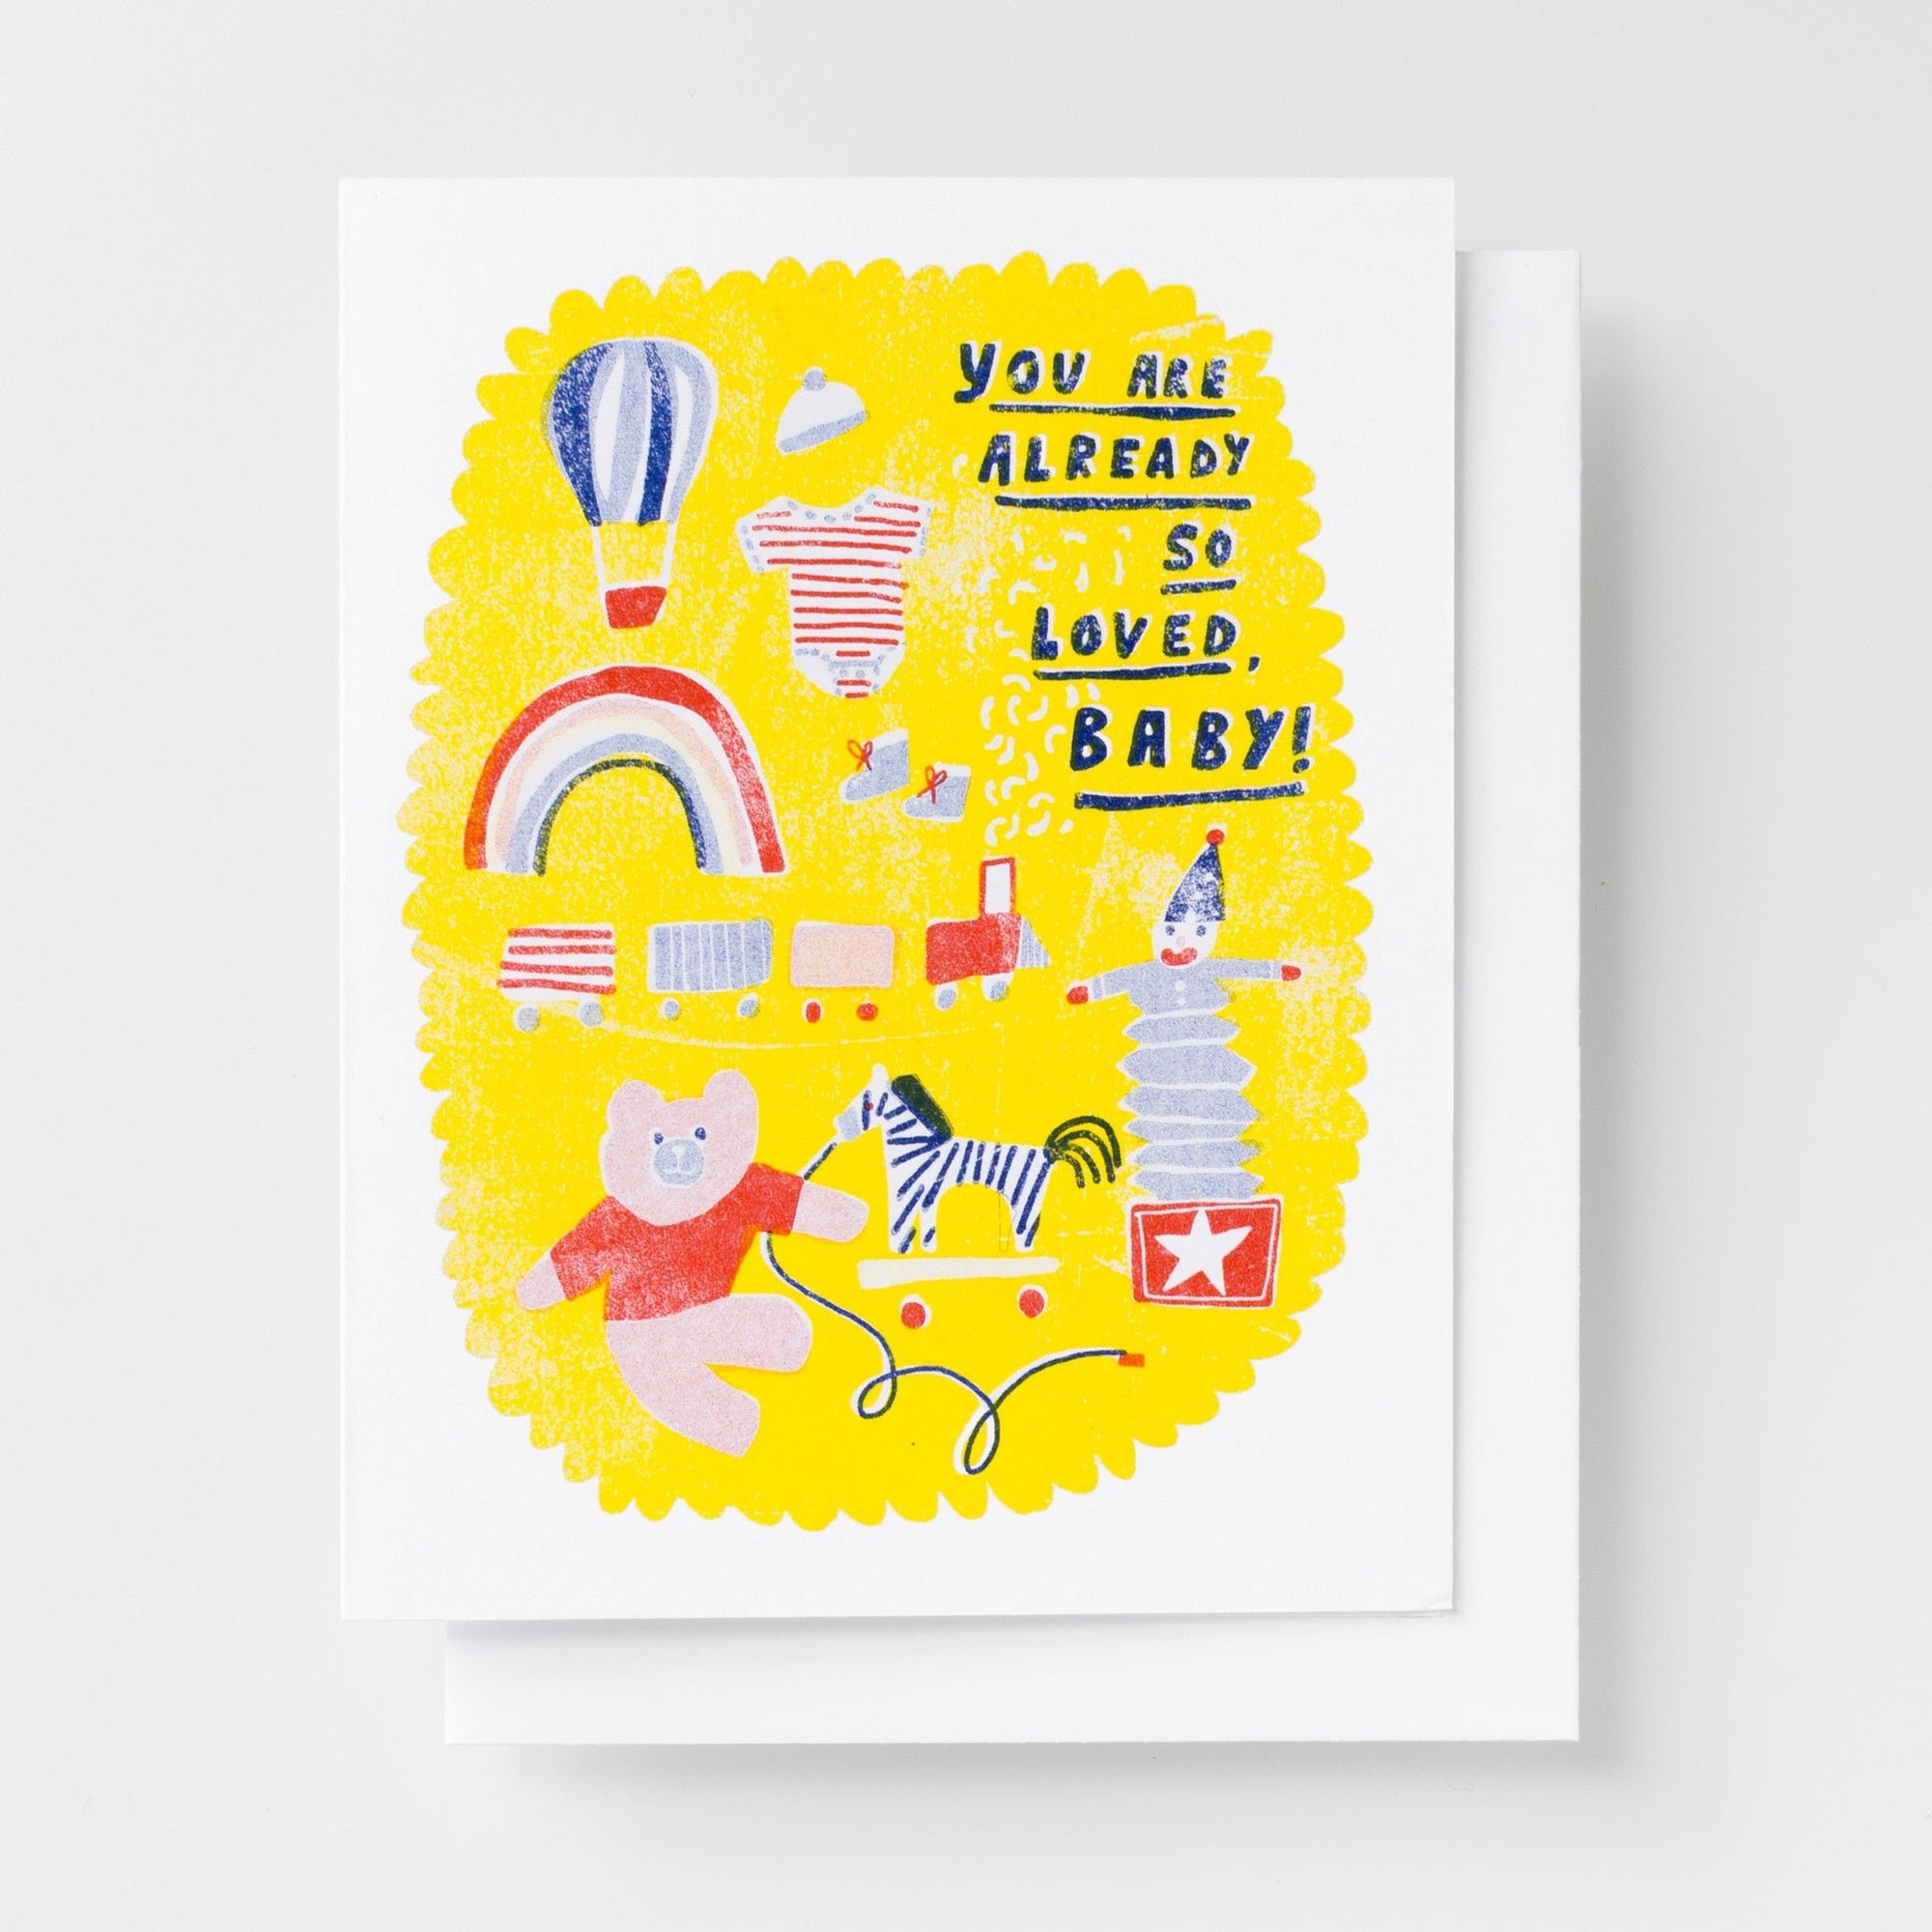 So Loved, Baby - Risograph Card - Yellow Owl Workshop